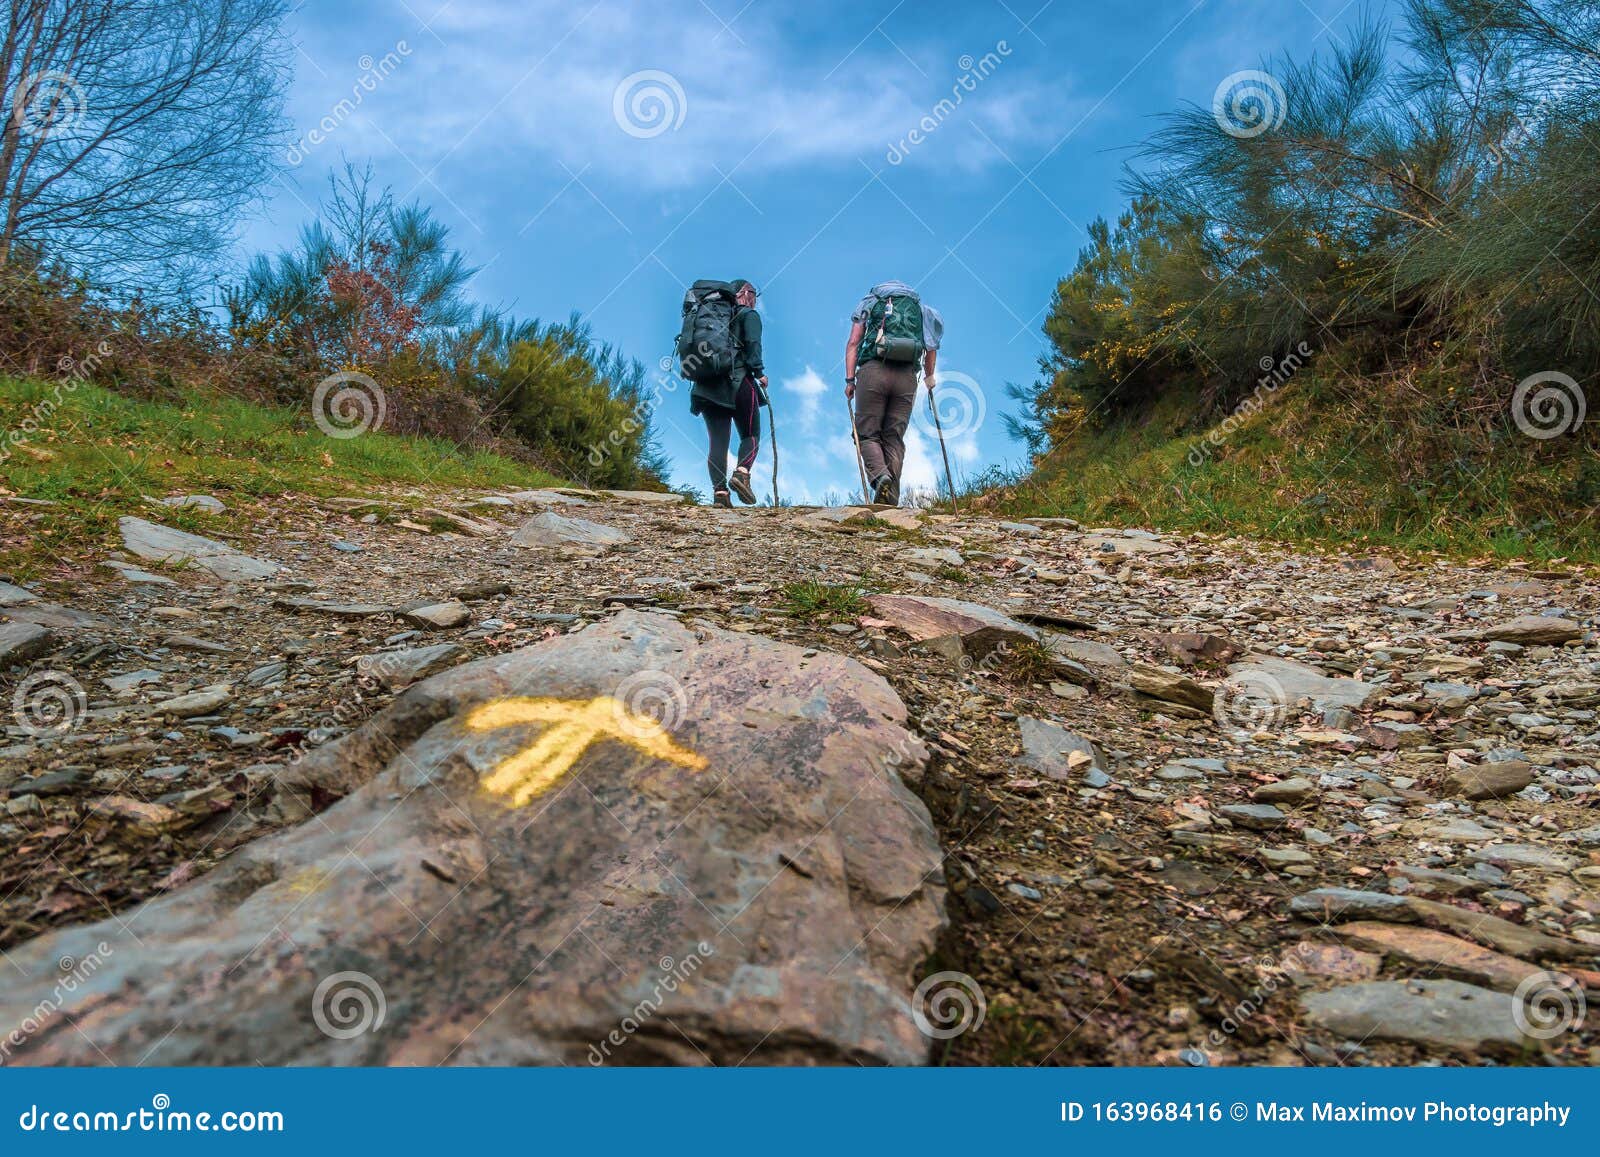 sarria, spain - two pilgrims hiking up a hill with the yellow arrow way mark outside sarria along the way of st james el camino